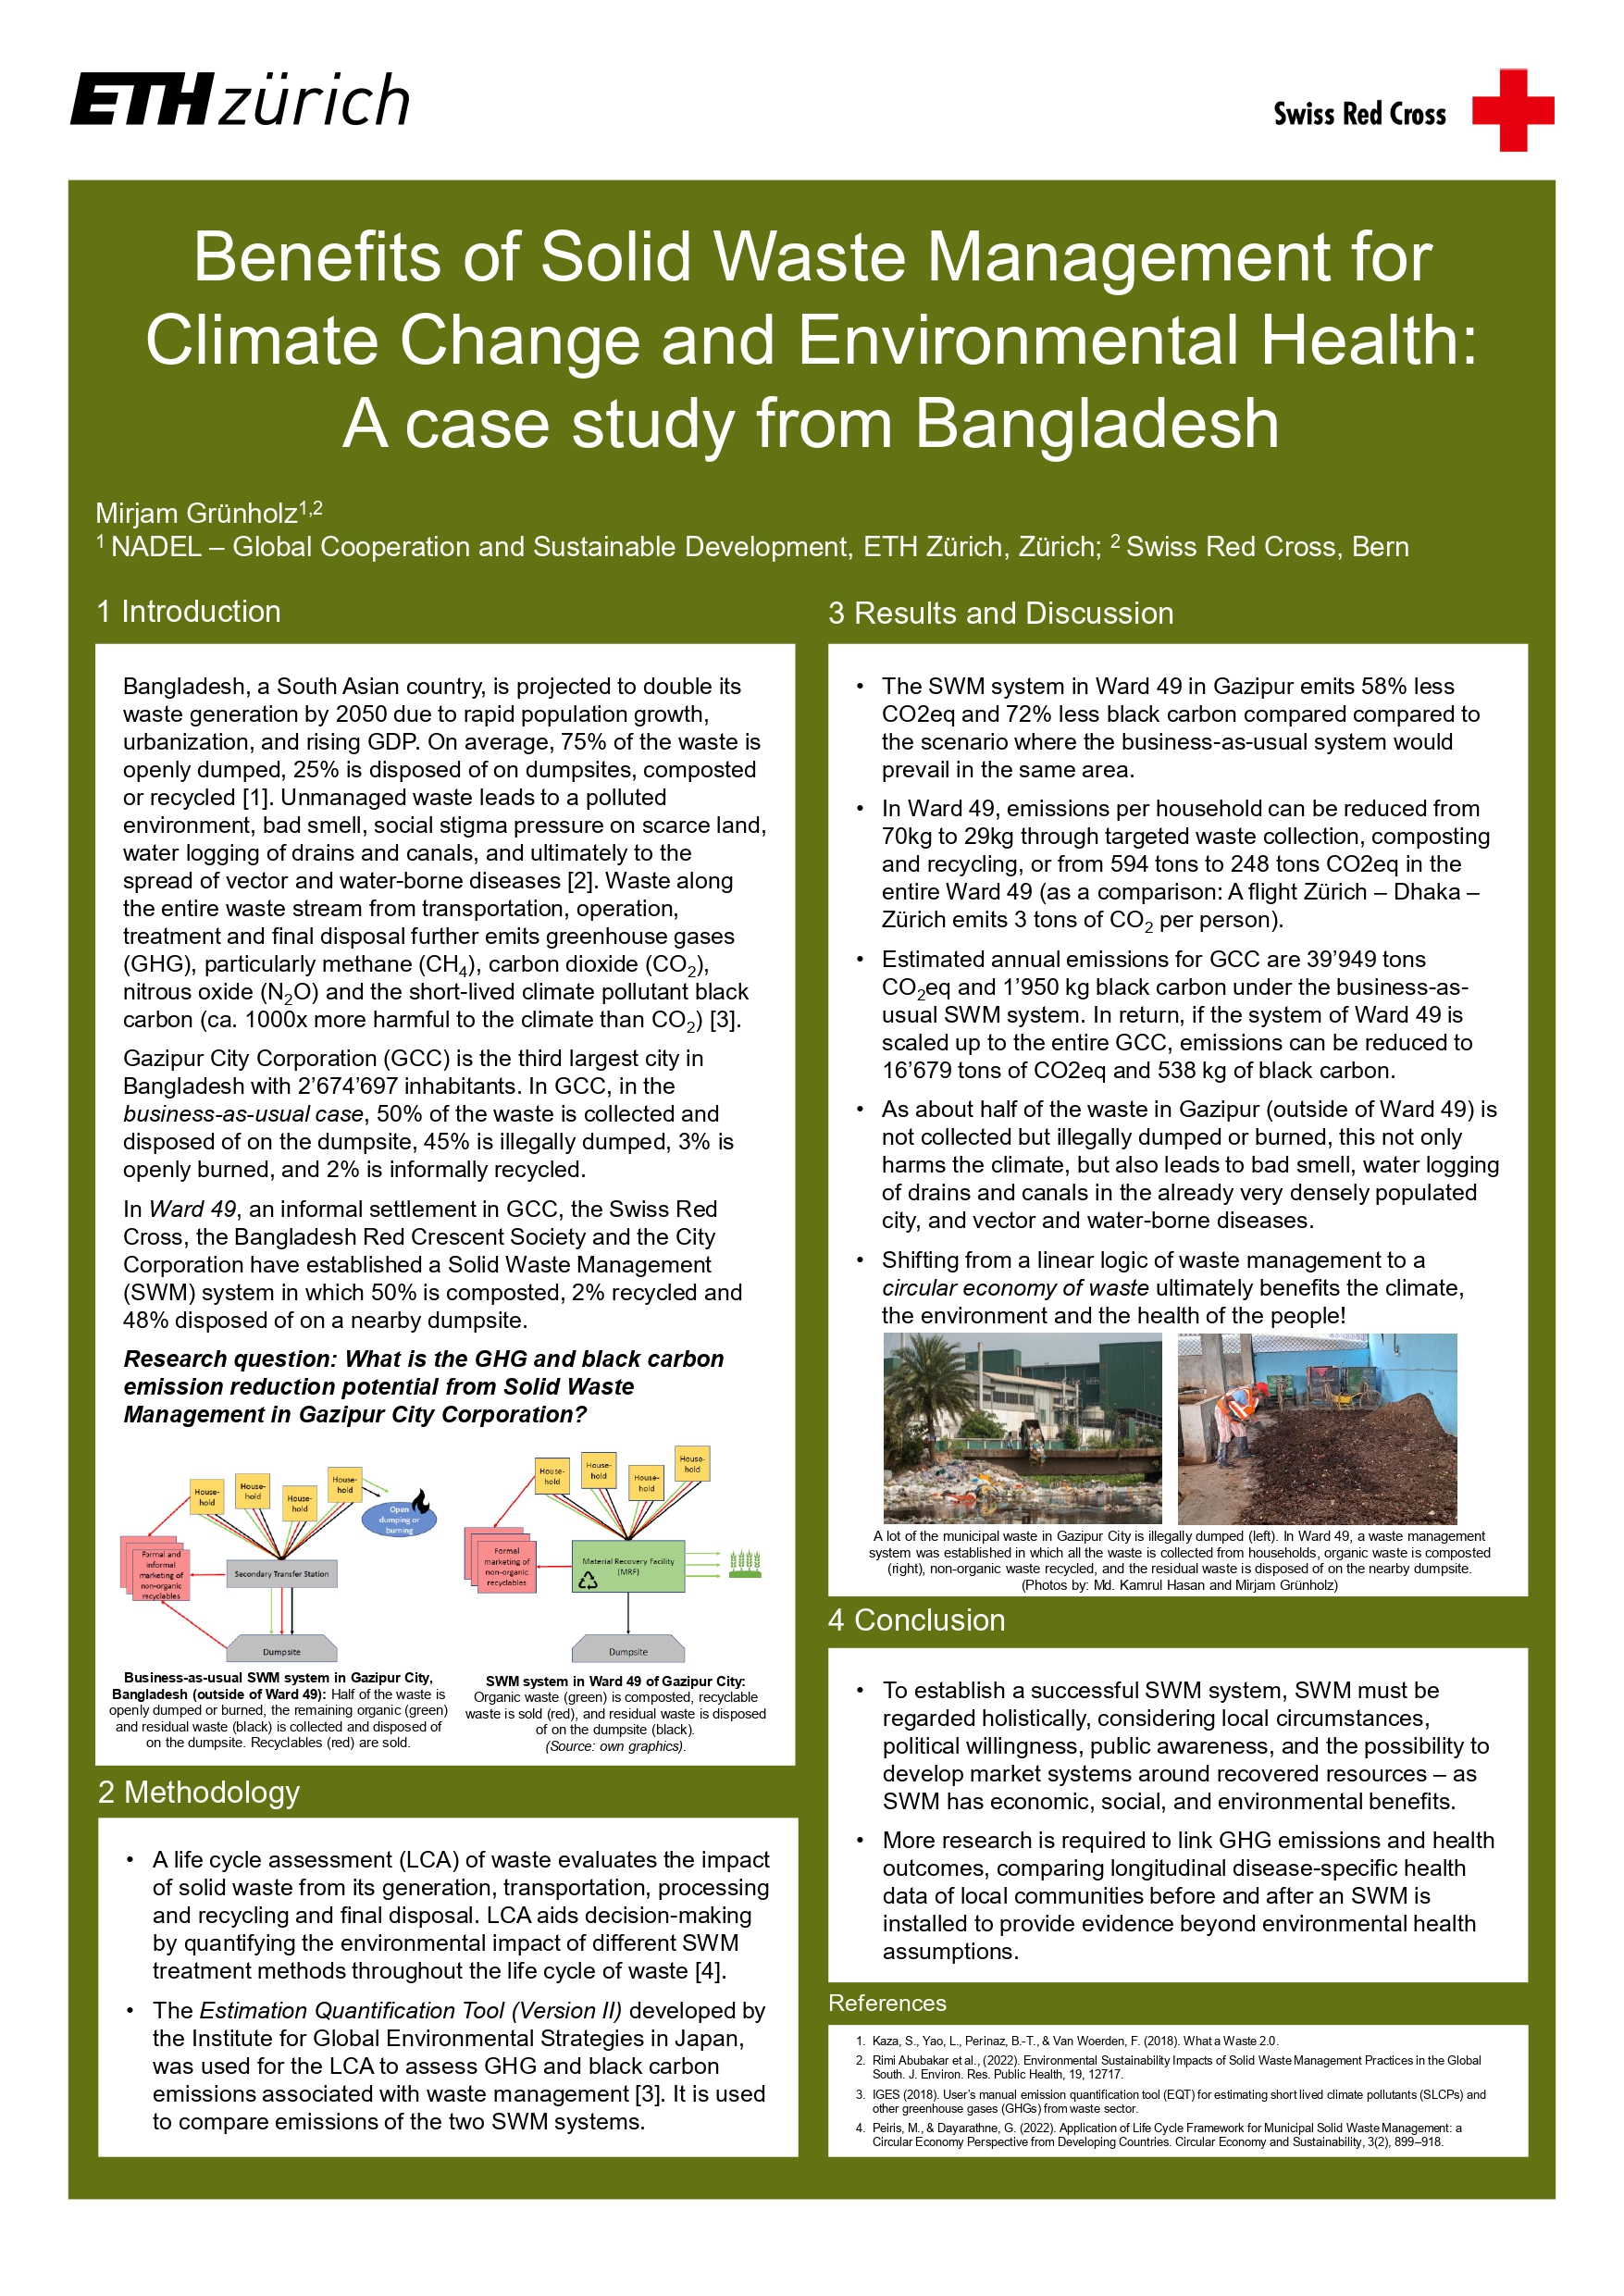 Benefits of Solid Waste Management on Climate Change and Environmental Health:  A case study from Bangladesh